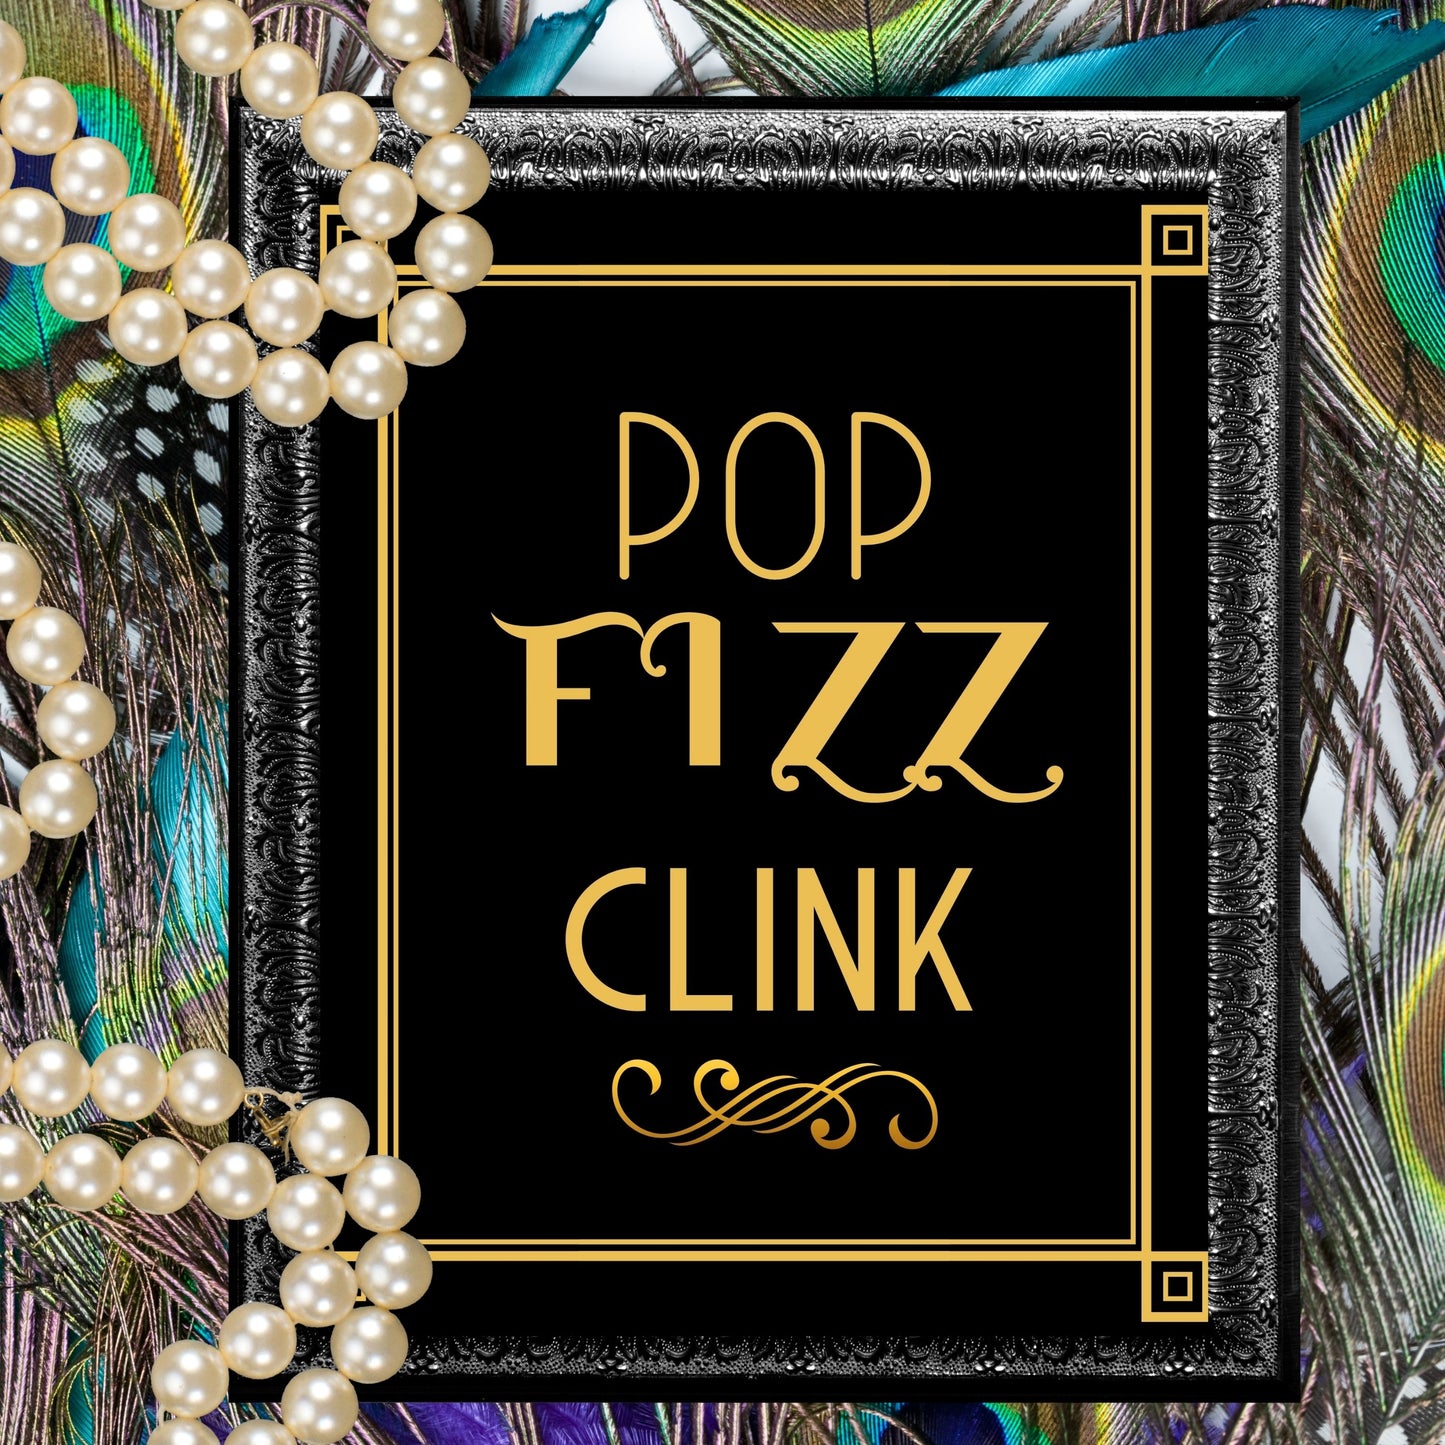 "Pop Fizz Clink" Printable Party Sign For Great Gatsby or Roaring 20's Party Or Wedding, Black & Gold, Printable Party Decor